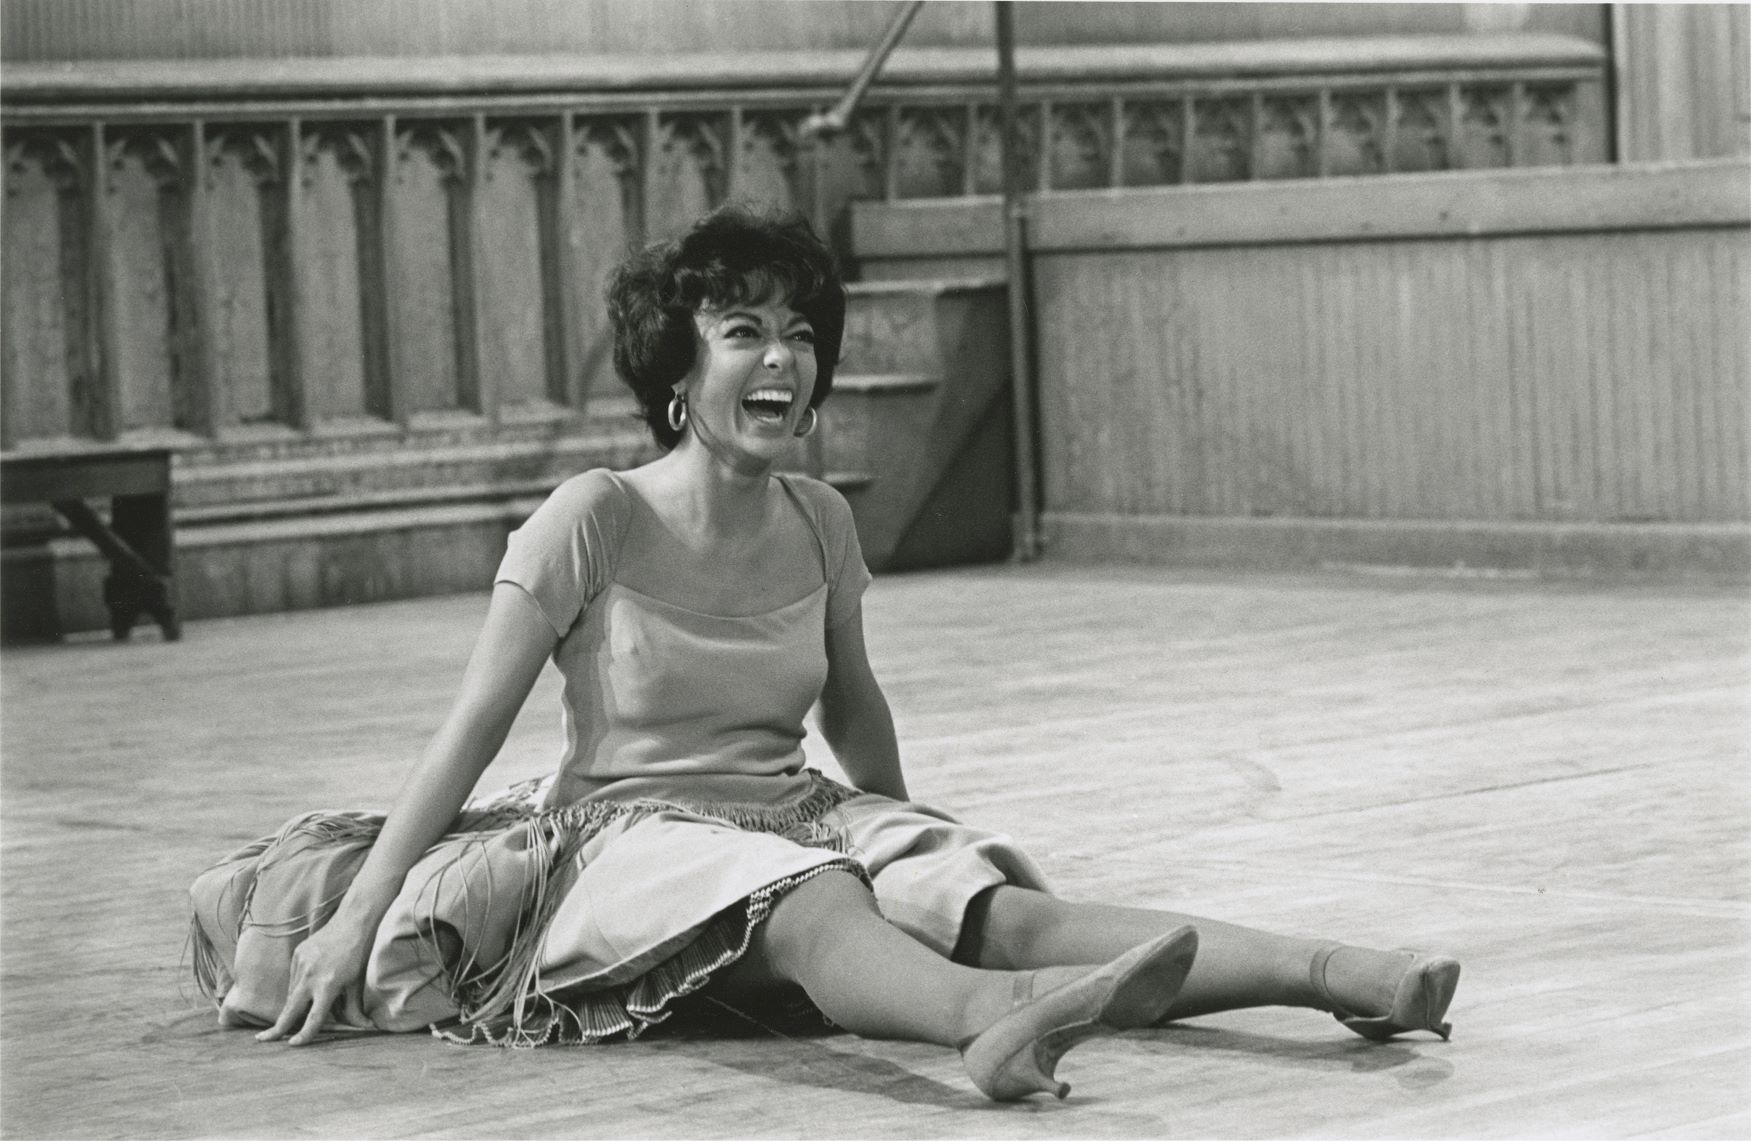 A-photo-of-Rita-Moreno-BTS-of-West-Side-Story-from-the-film-RITA-MORENO-JUST-A-GIRL-WHO-DECIDED-TO-GO-FOR-IT-Courtesy-of-MGM-Media-Licensing.s.jpeg